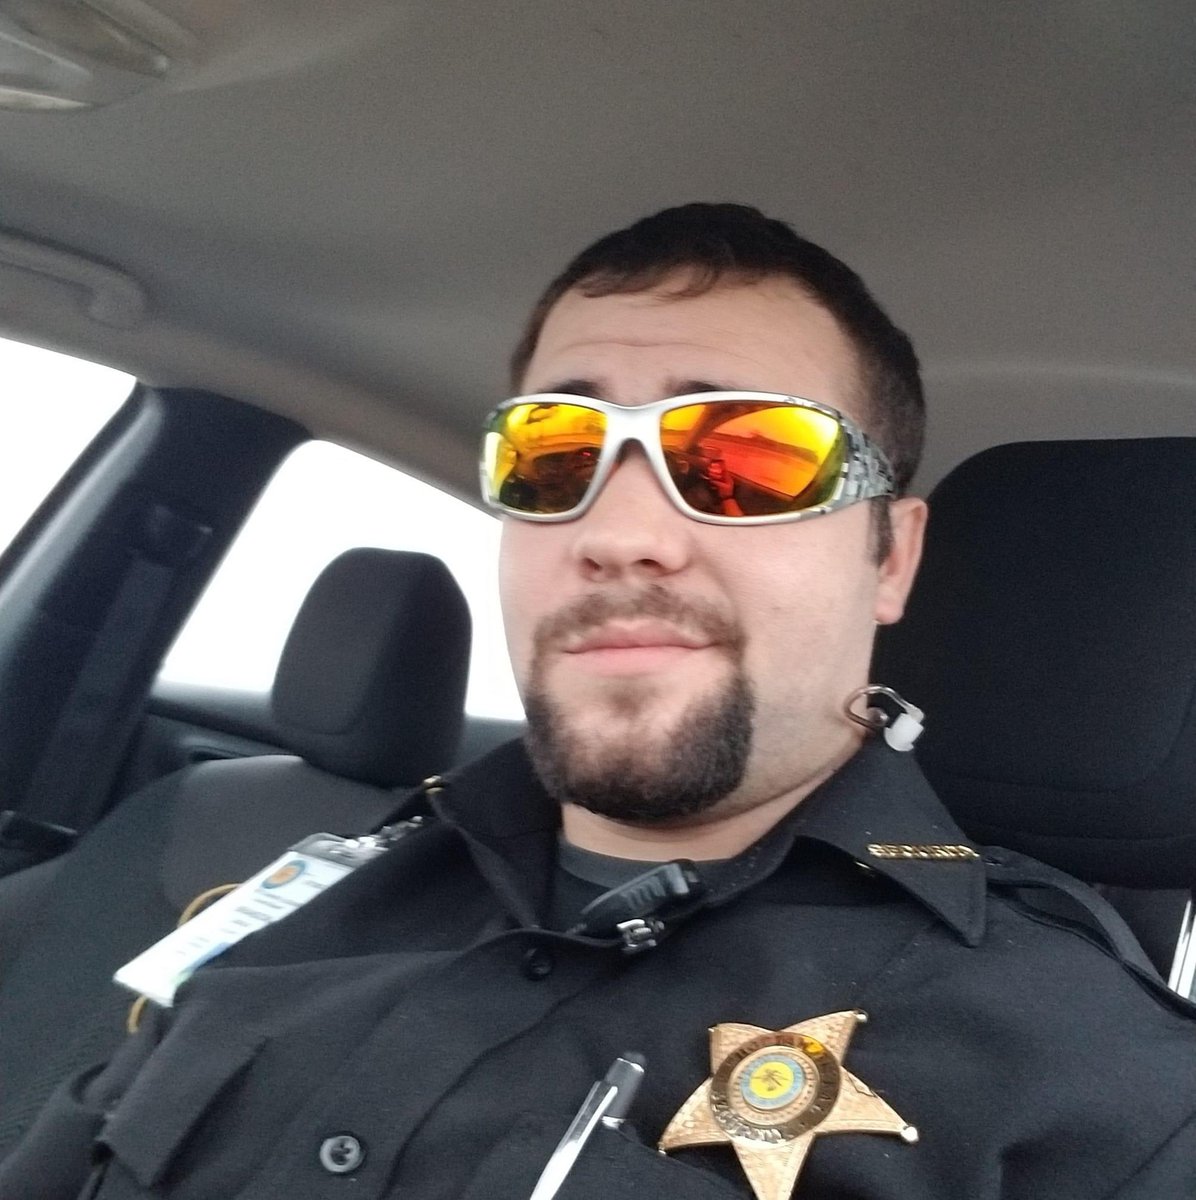 An Oklahoma police officer who was arrested in February for lewd acts with a minor has been rearrested. He was initially arrested for showing obscene material to a 10yr old girl, inappropriately touching her, & attempting to remove her bra. Meet Officer Brandon LeDoux.